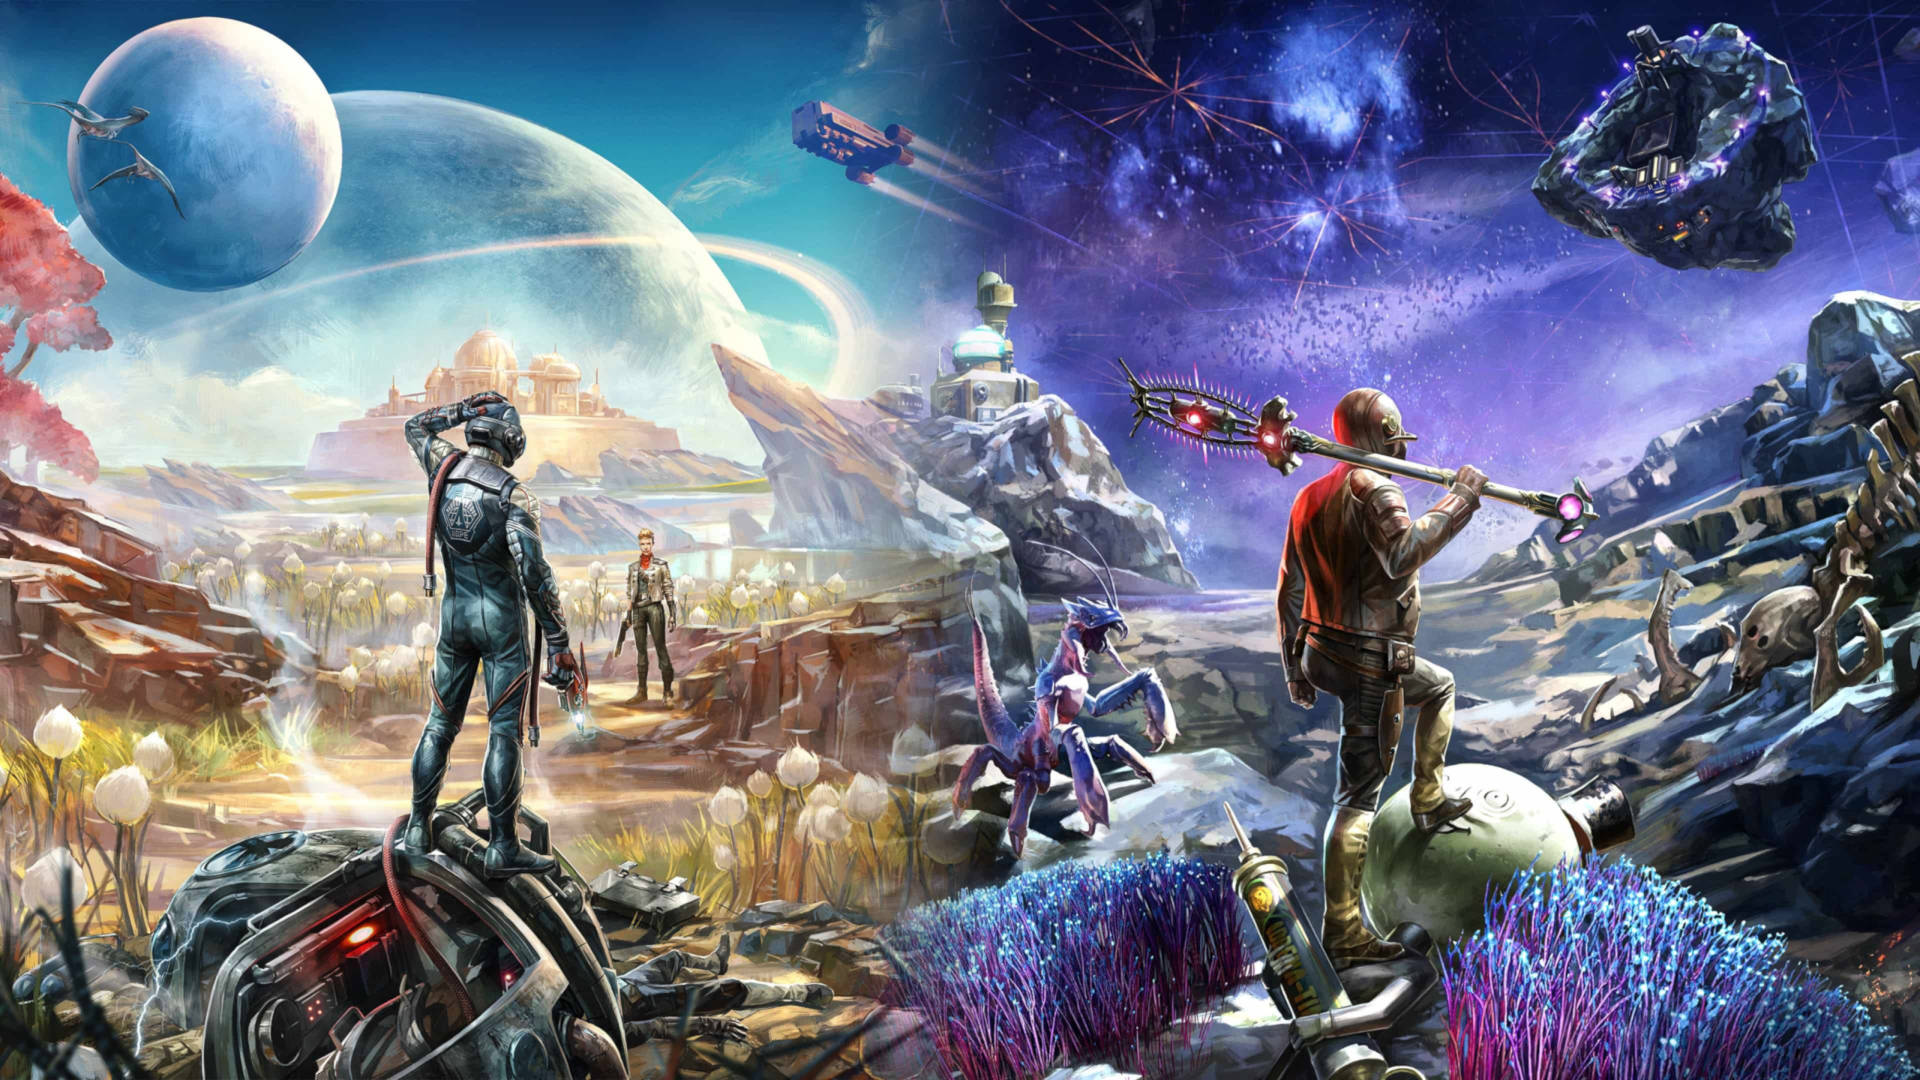 Futuristic Adventure In The Outer Worlds Wallpaper